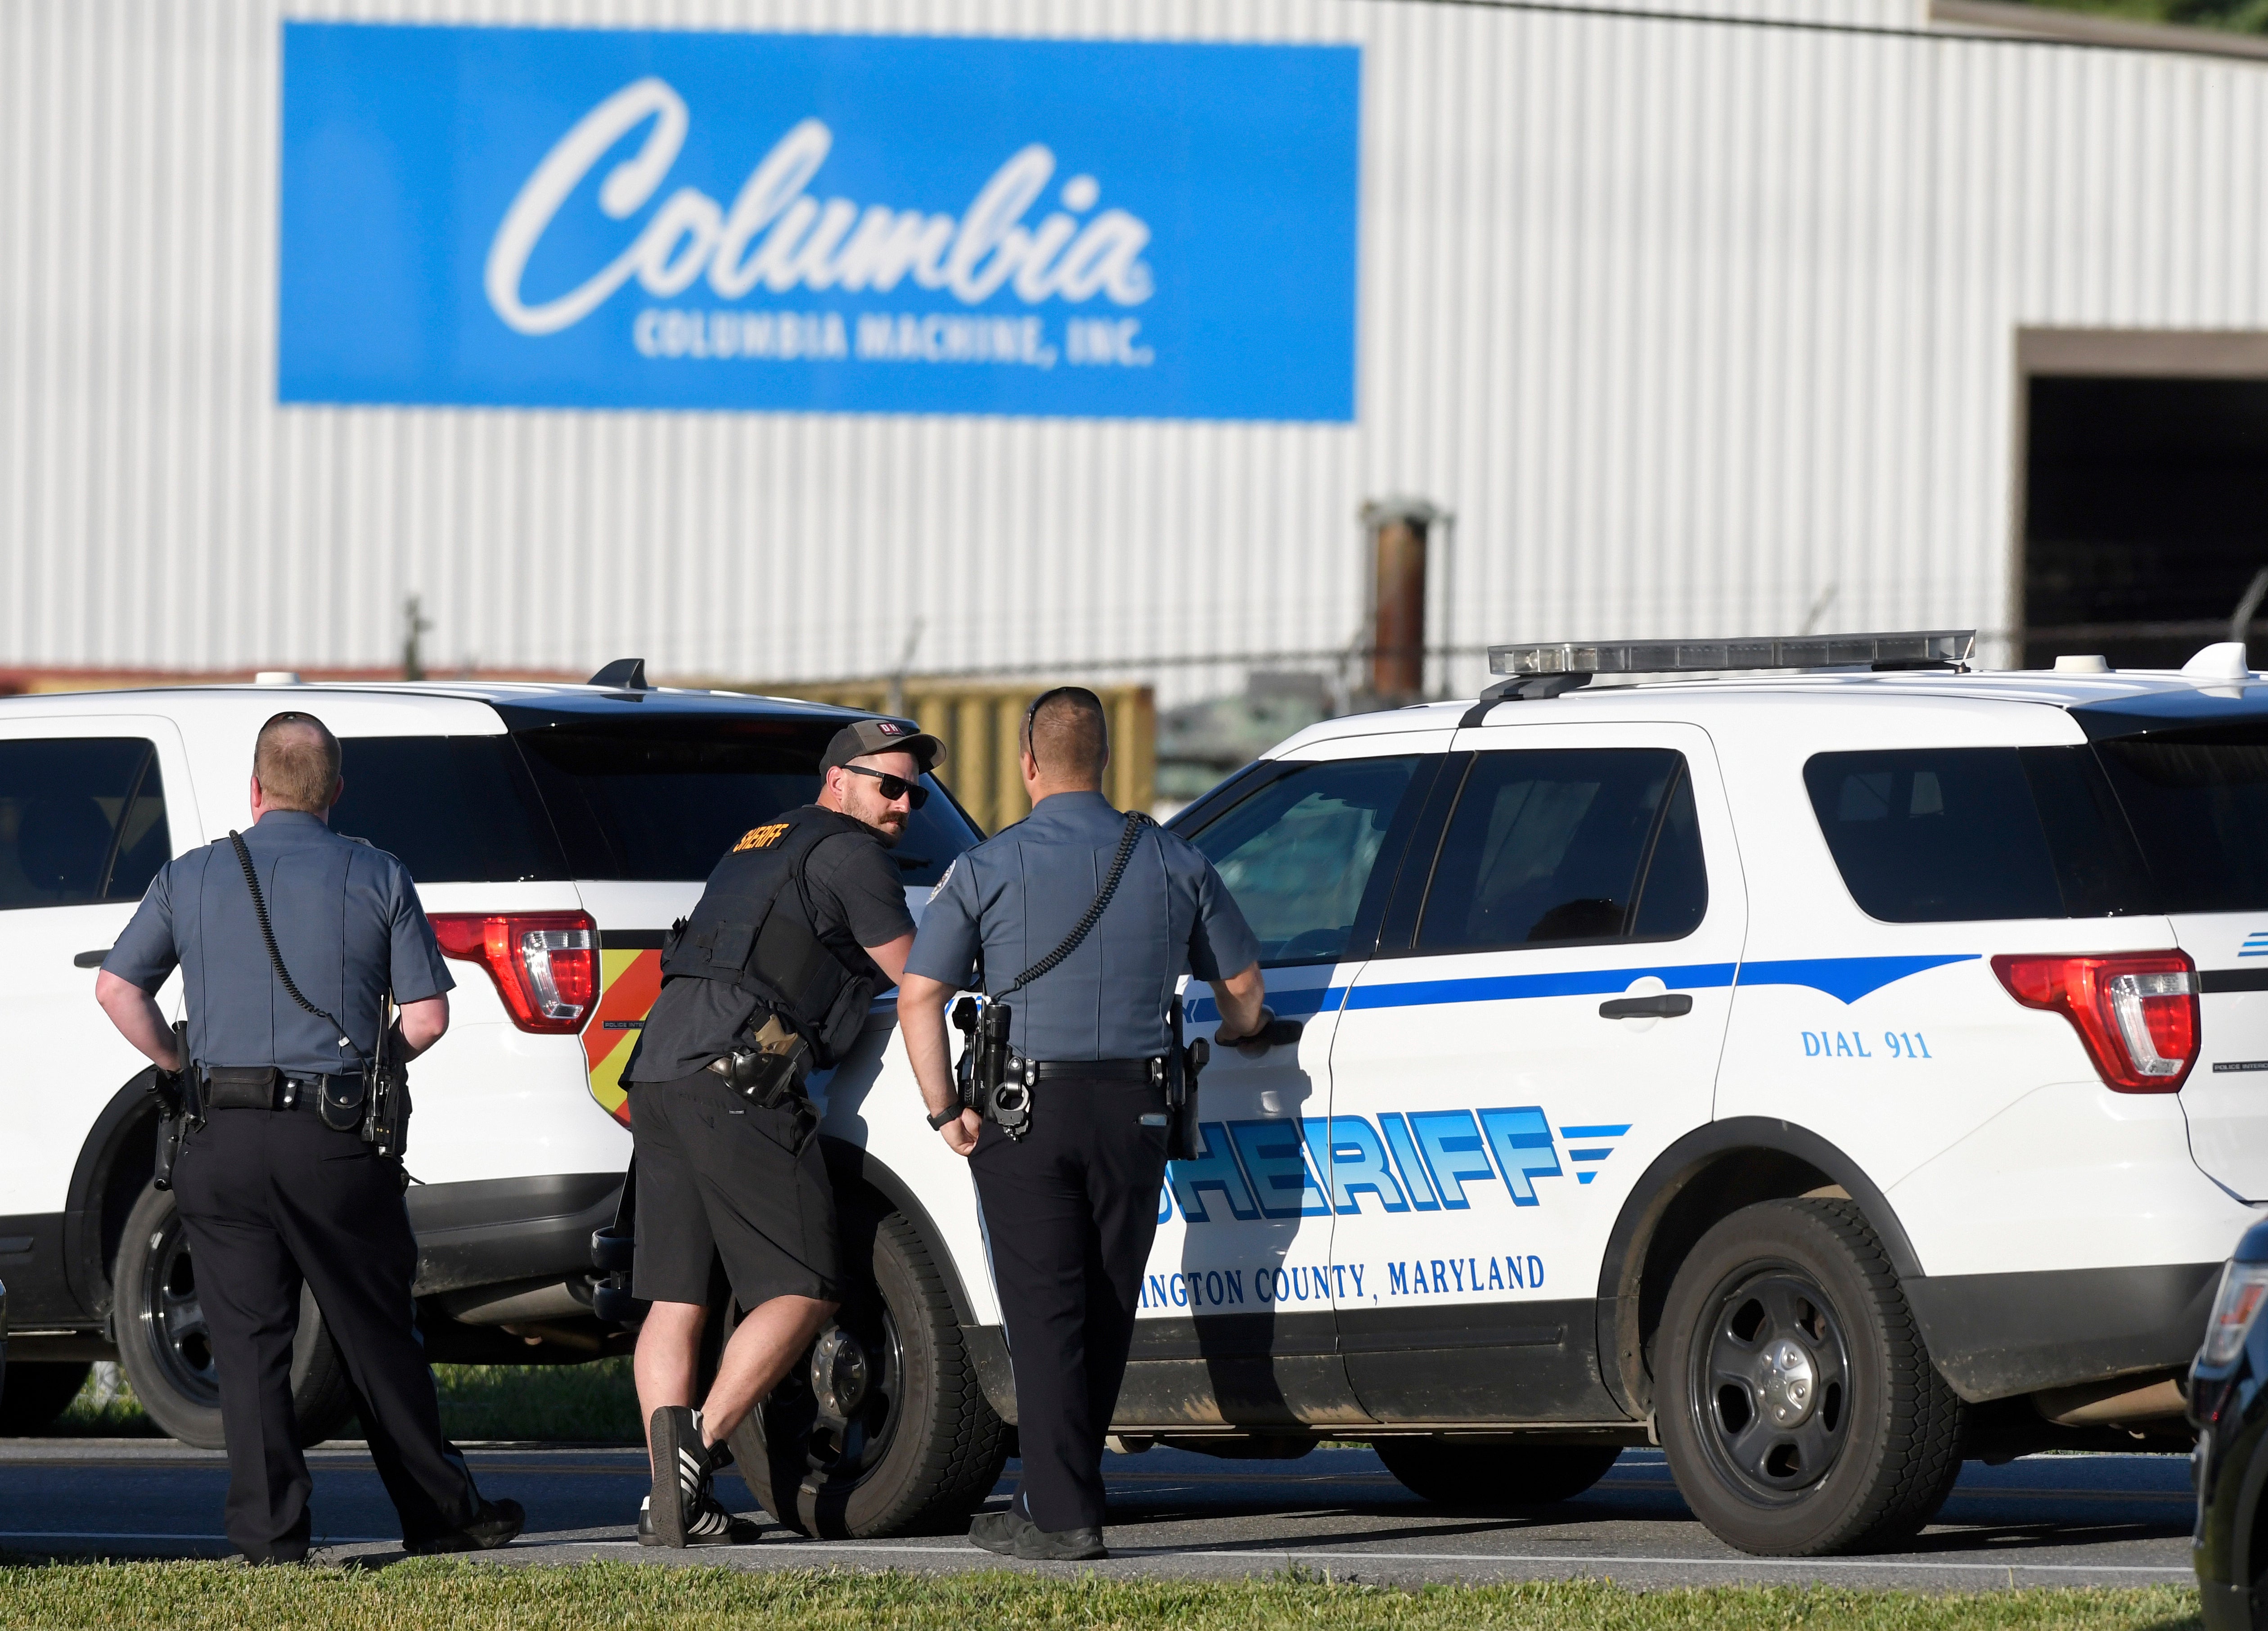 Police stand near where a man opened fire at a business, killing three people before the suspect and a state trooper were wounded in a shootout, according to authorities, in Smithsburg, Md., Thursday, June 9, 2022. The Washington County (Md.) Sheriff's Office said in a news release that three victims were found dead at Columbia Machine Inc. and a fourth victim was critically injured.